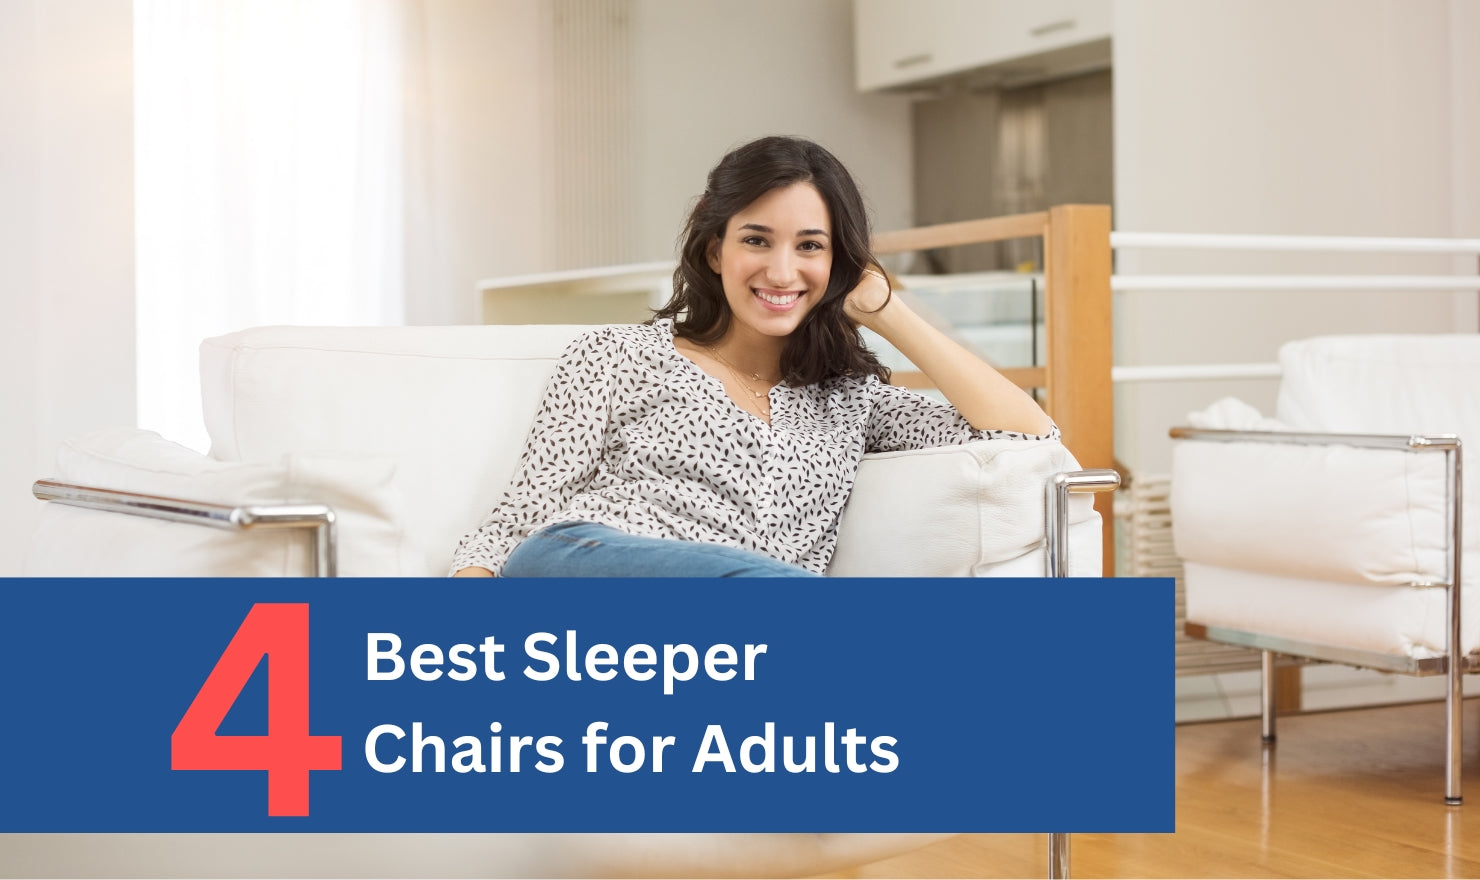 Best Sleeper chairs for adults